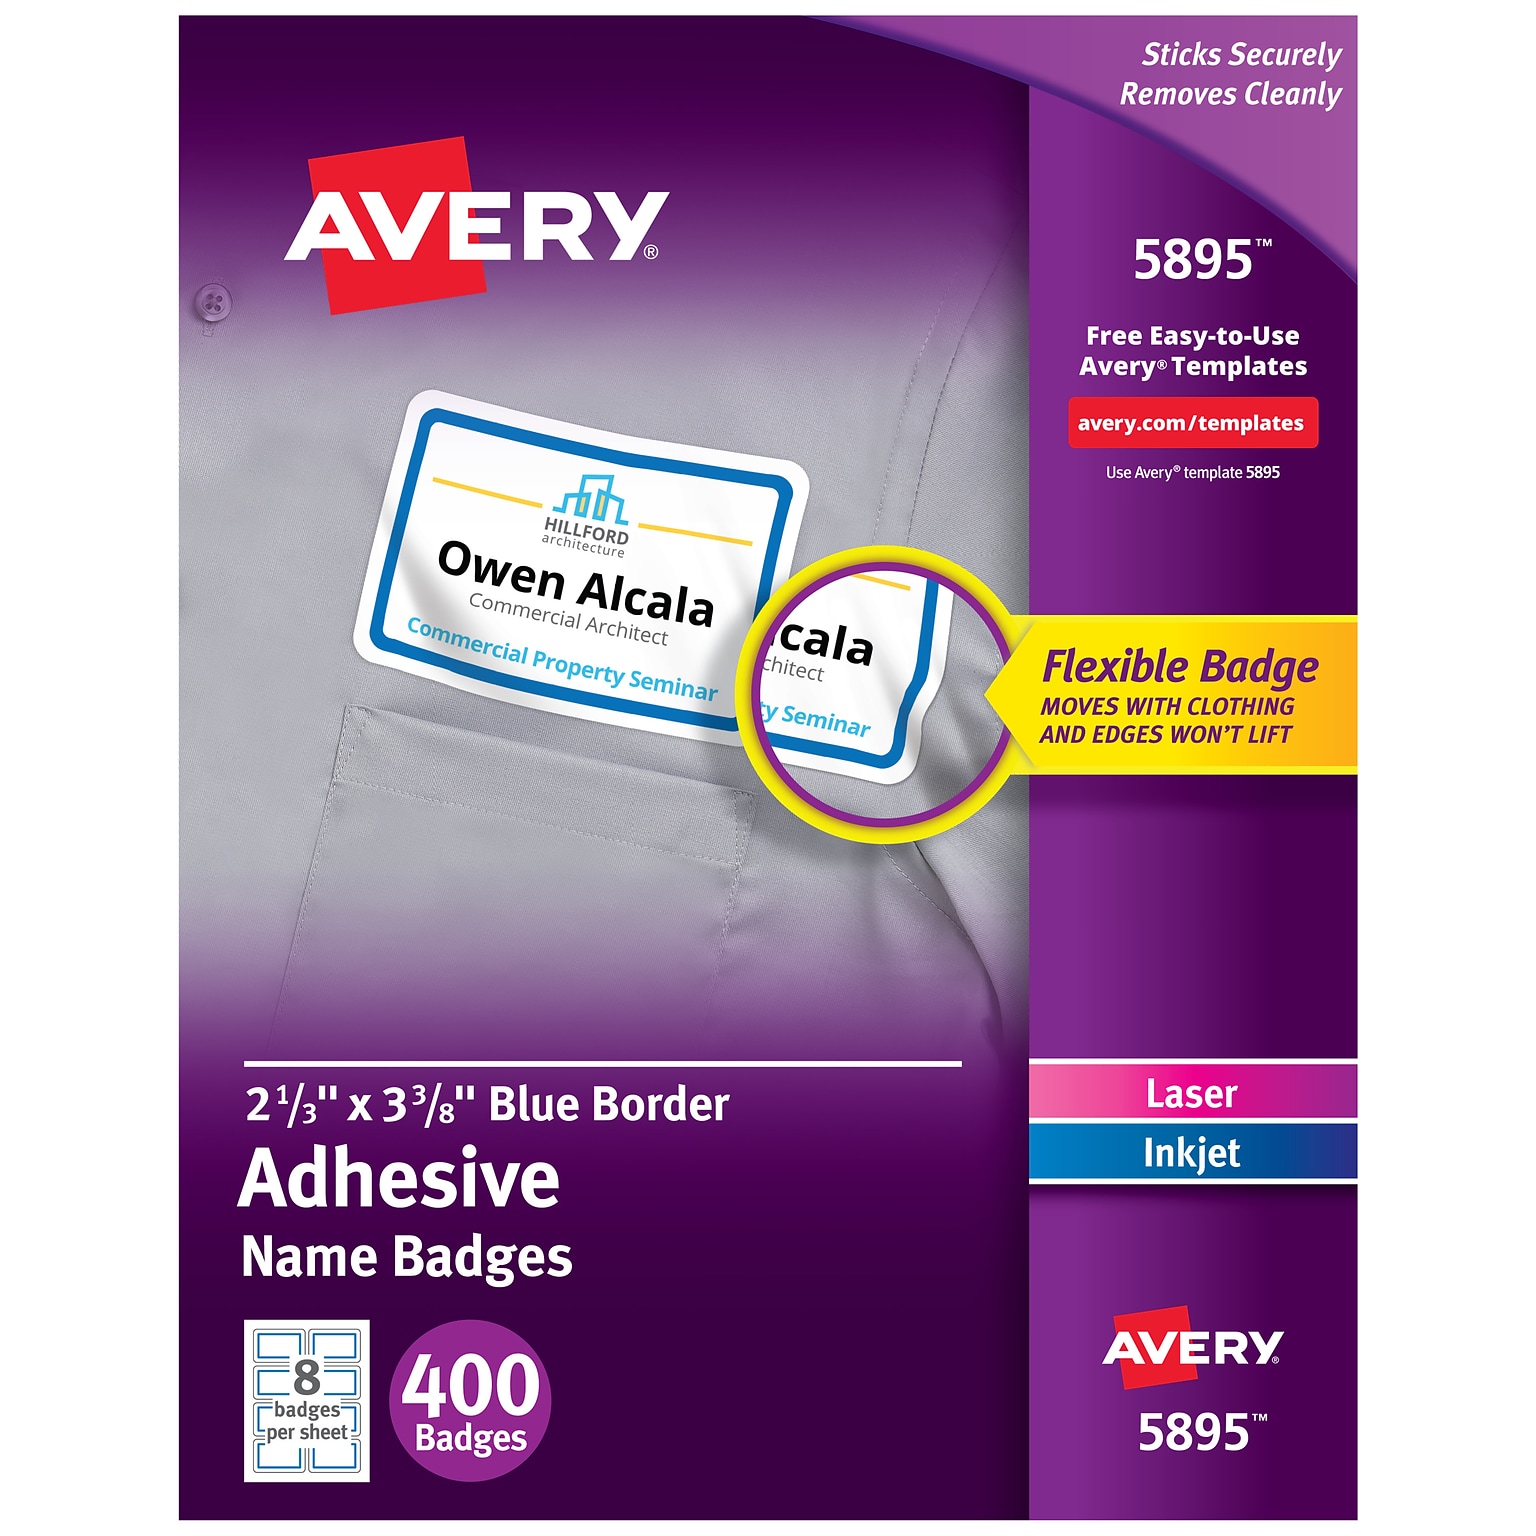 Avery Flexible Laser/Inkjet Name Badge Labels, 2 1/3 x 3 3/8, White with Blue Border, 400 Labels Per Pack (5895)